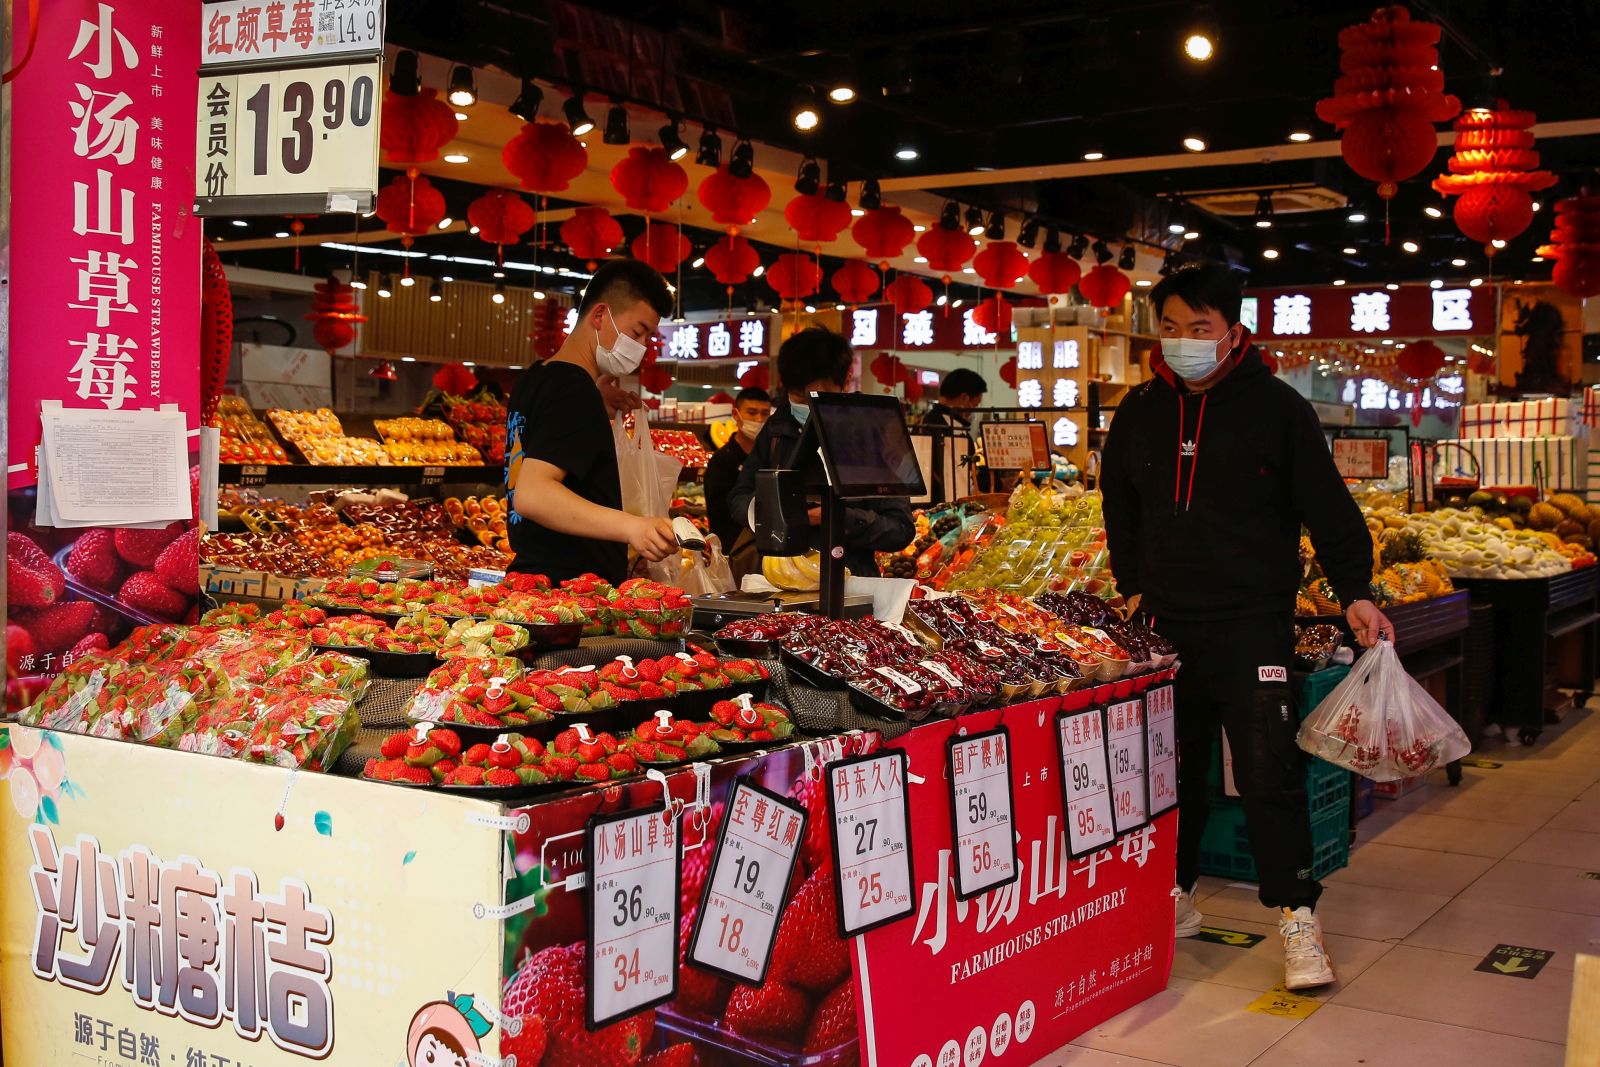 epa09884226 A man purchases fruits at a store in Beijing, China, 11 April 2022. China's consumer price index (CPI), a gauge for inflation, rose 1.5 percent year on year in March, up from 0.9 percent growth in February. The increase is driven by the rising cost of global commodities as well as epidemic outbreaks, the National Bureau of Statistics (NBS) said.  EPA/MARK R. CRISTINO